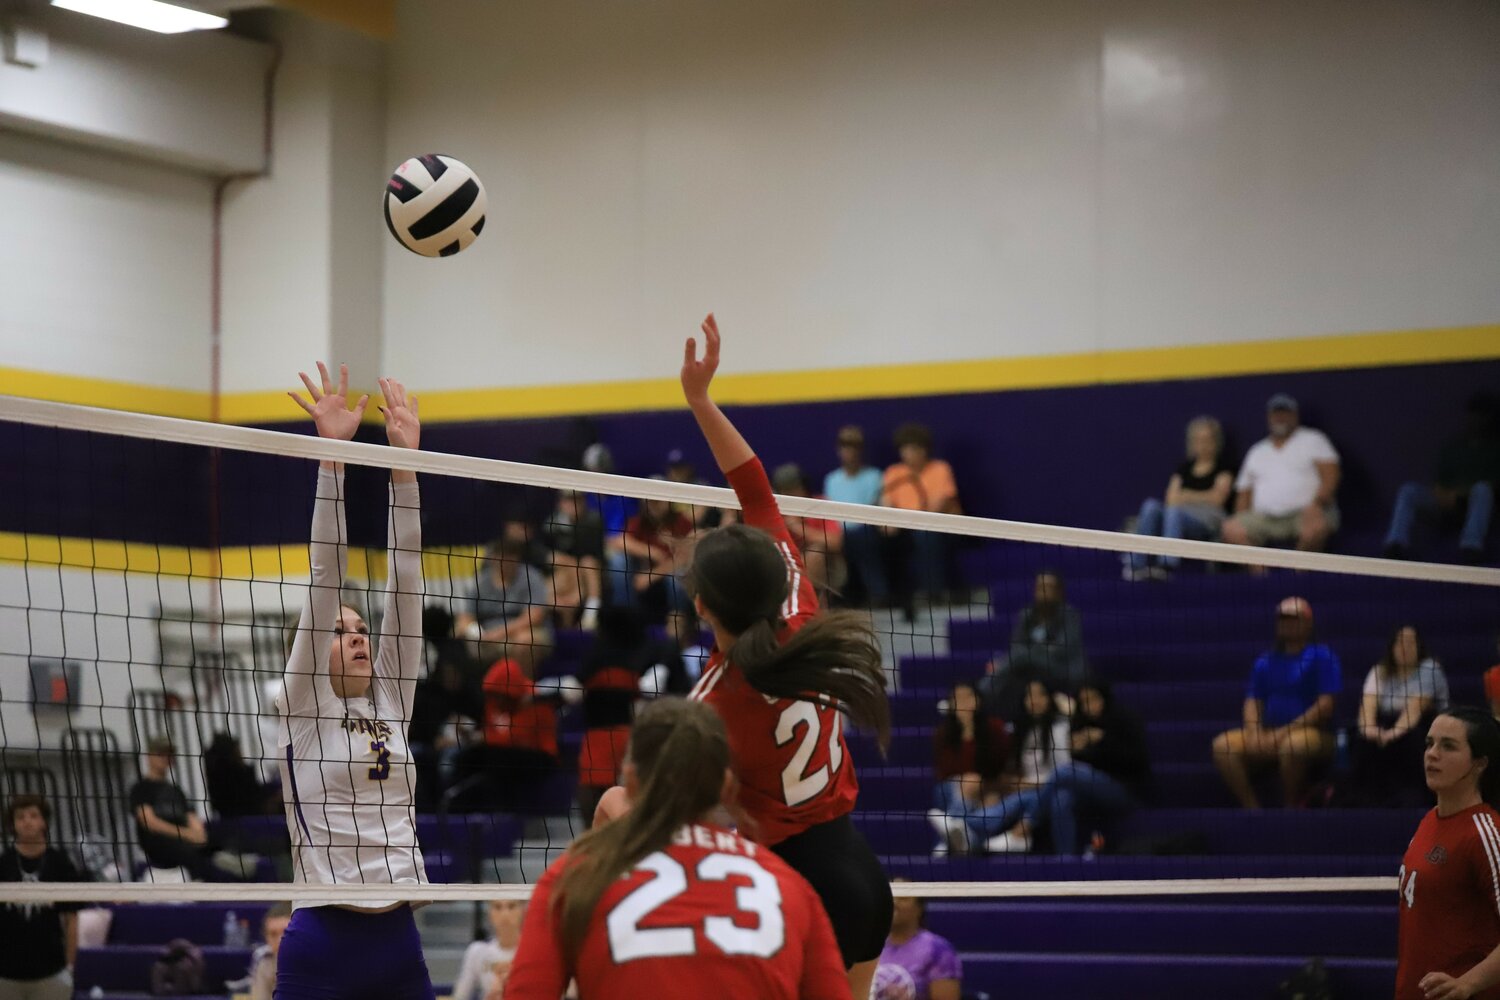 Gilbert’s Hannah Miles skies in to spike the ball during their dominant win over Swansea.